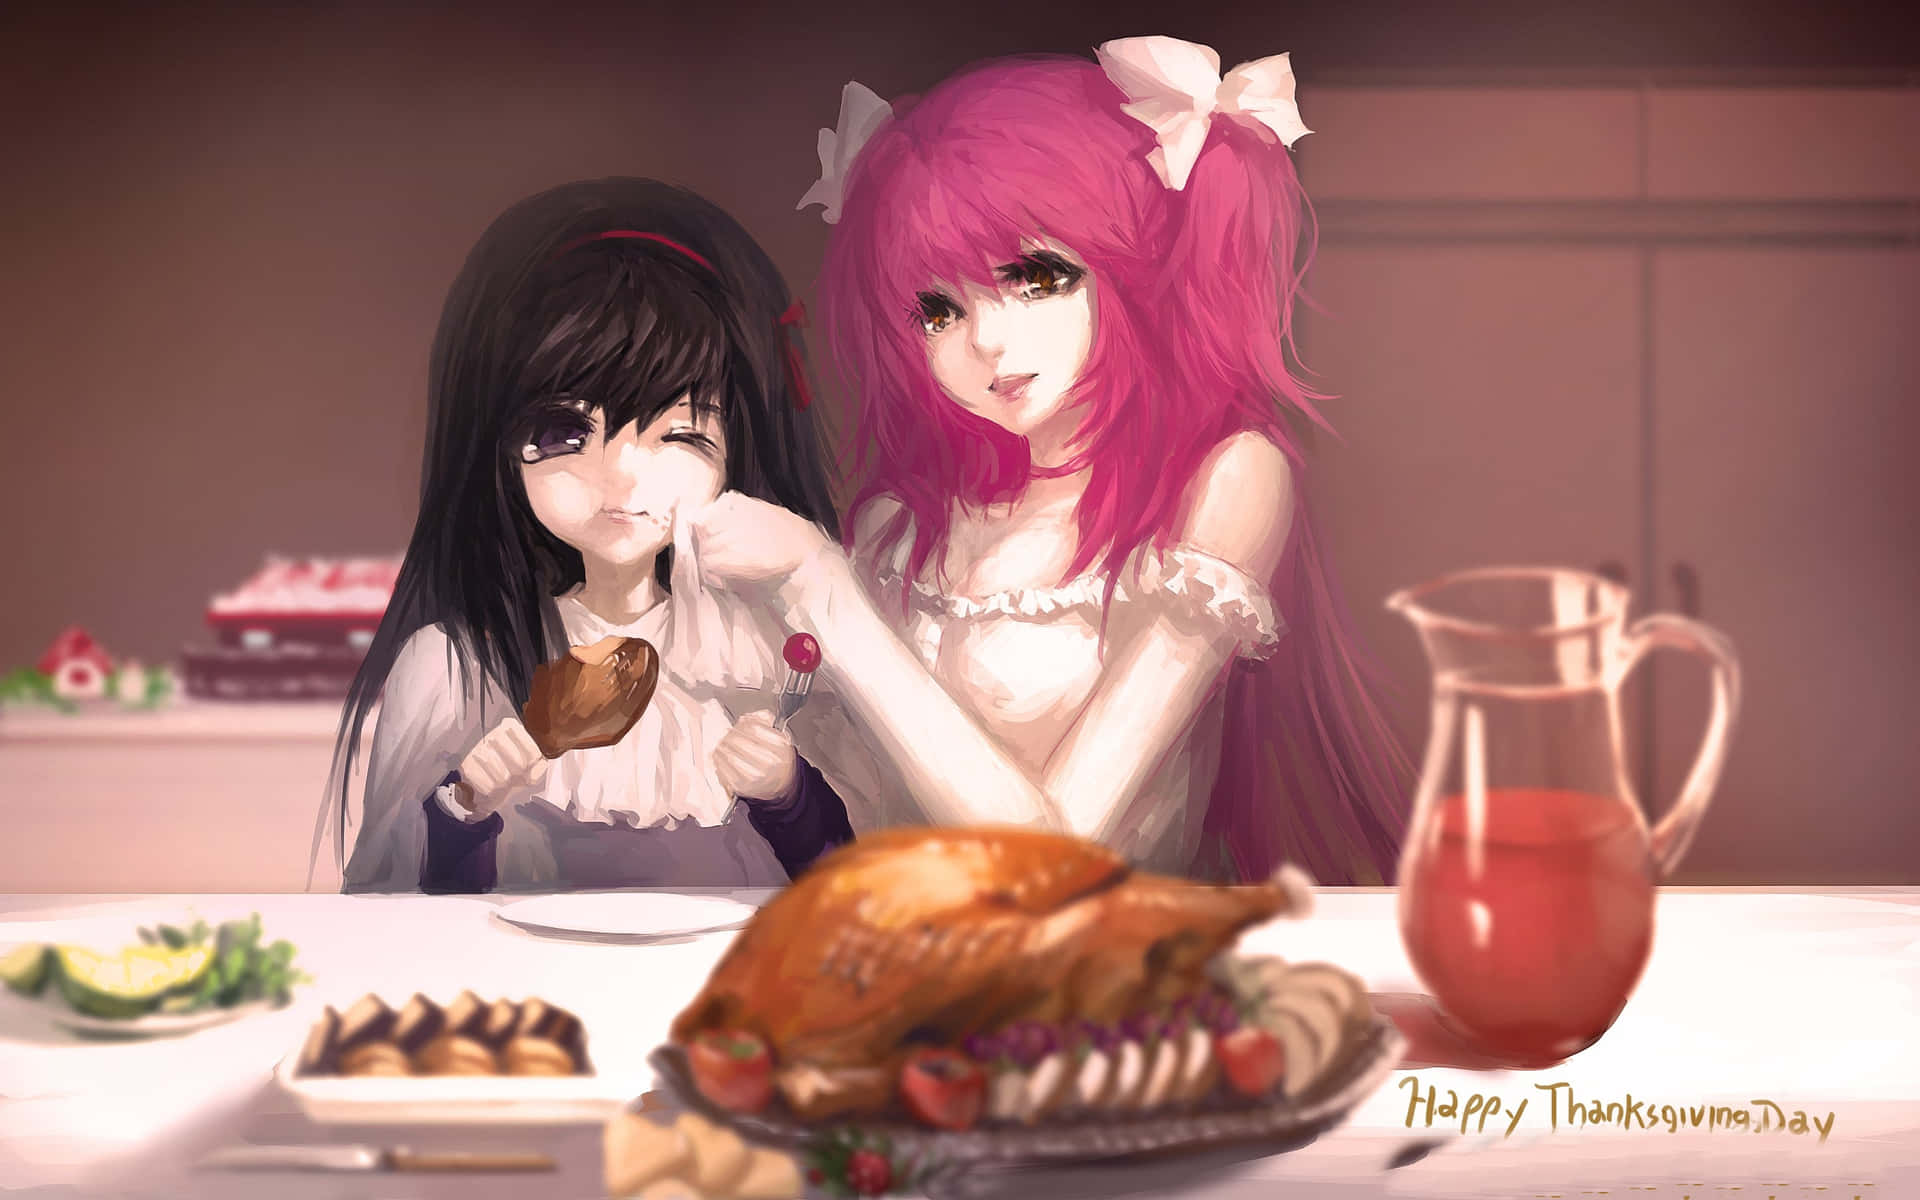 Celebrating Thanksgiving with Anime Wallpaper